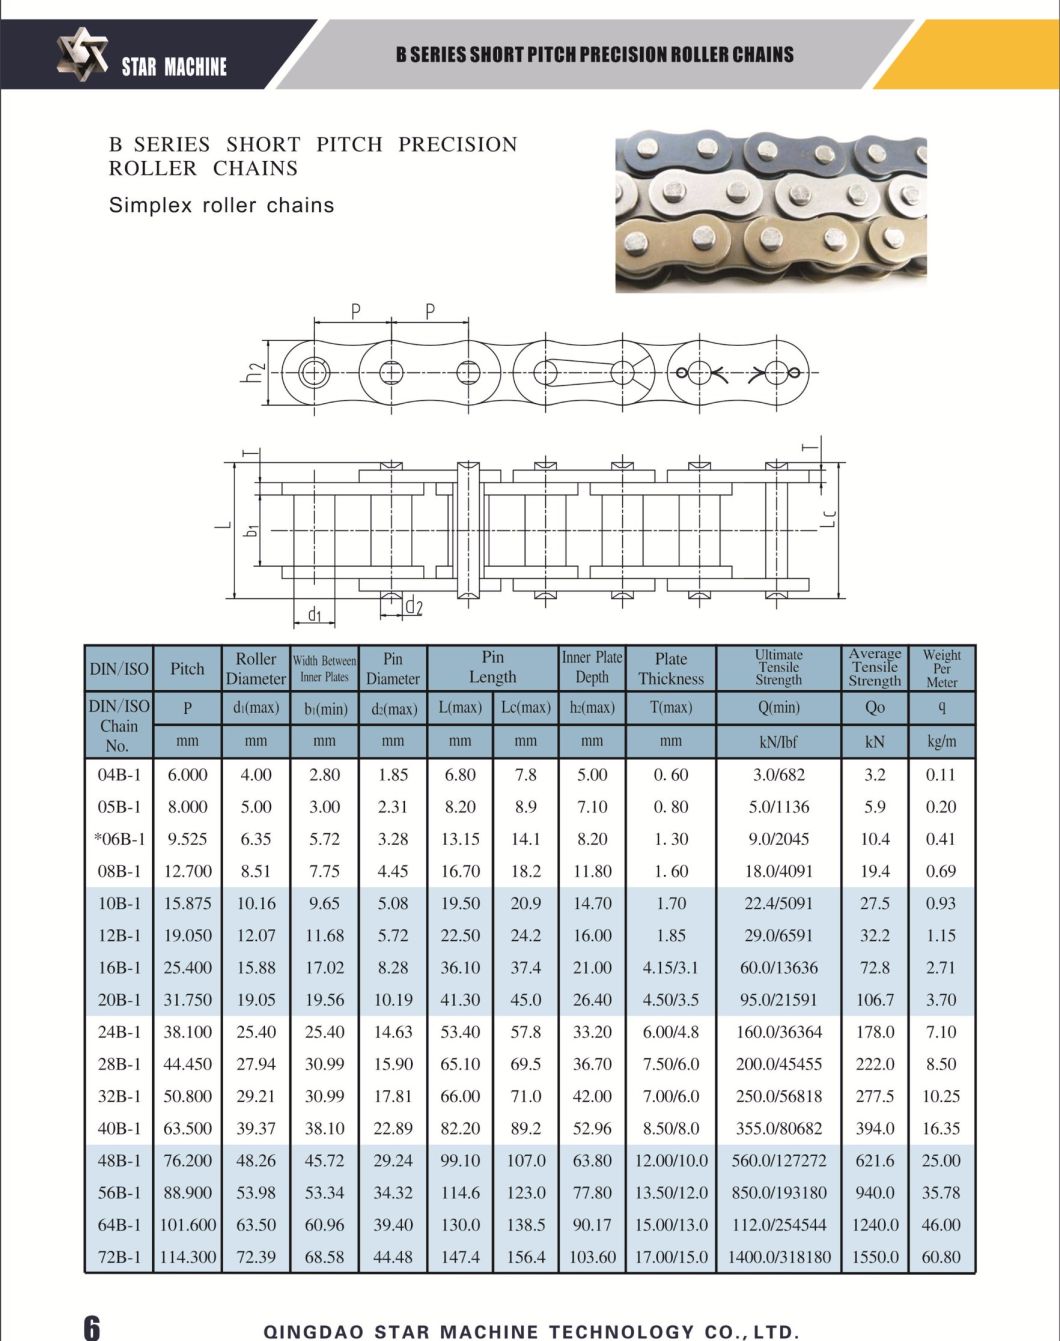 Standard Short Pitch Precision Roller Chain